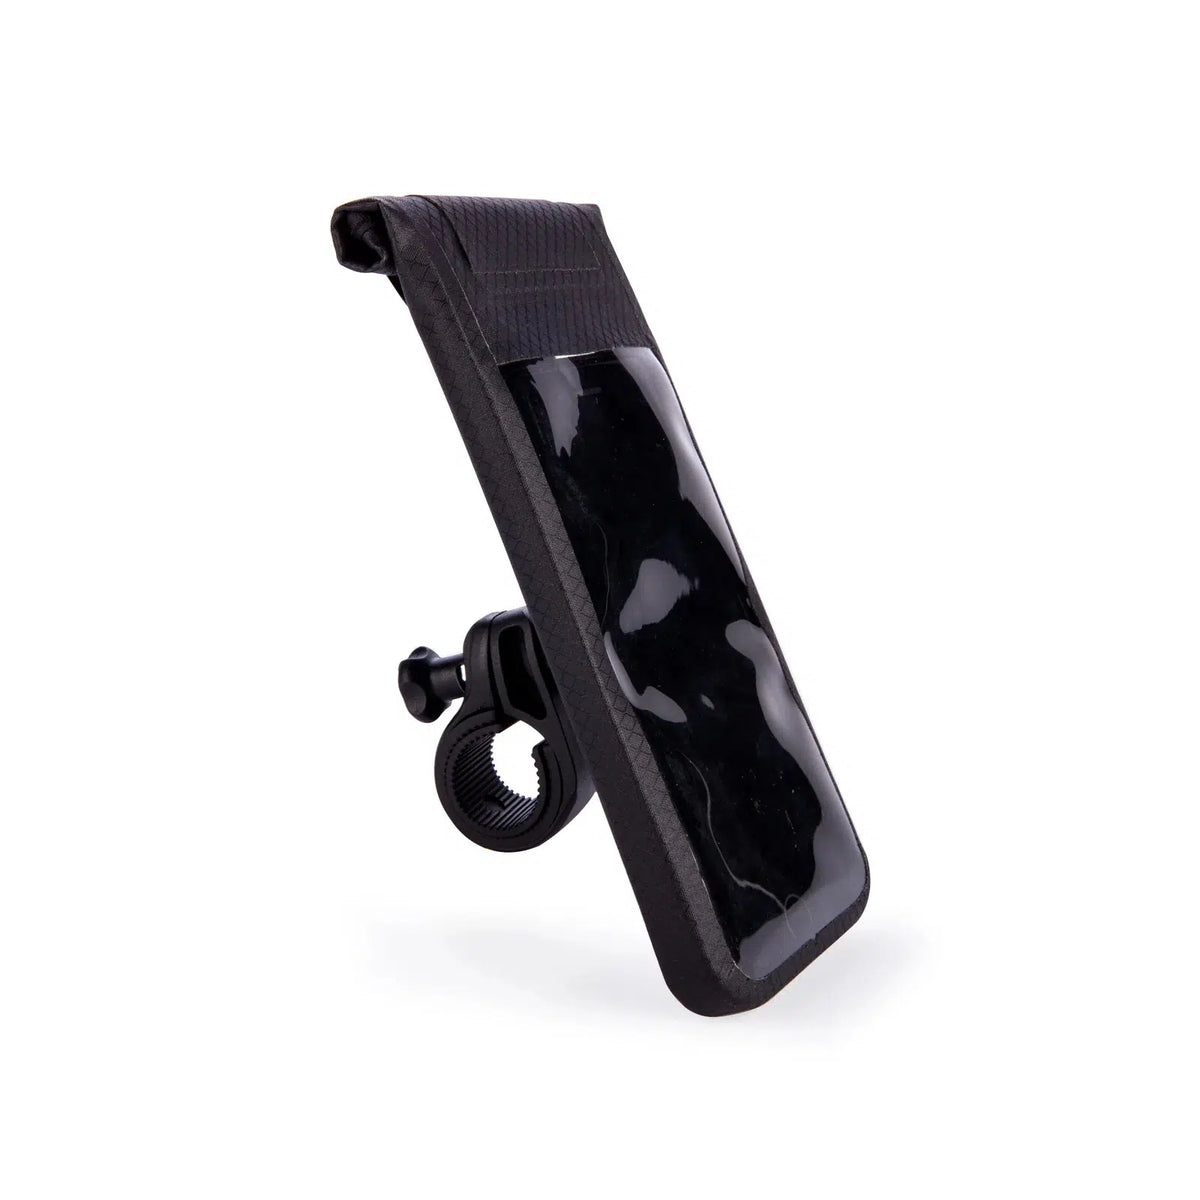 Front side view of All Weather Phone Mount showing the mount and the case.